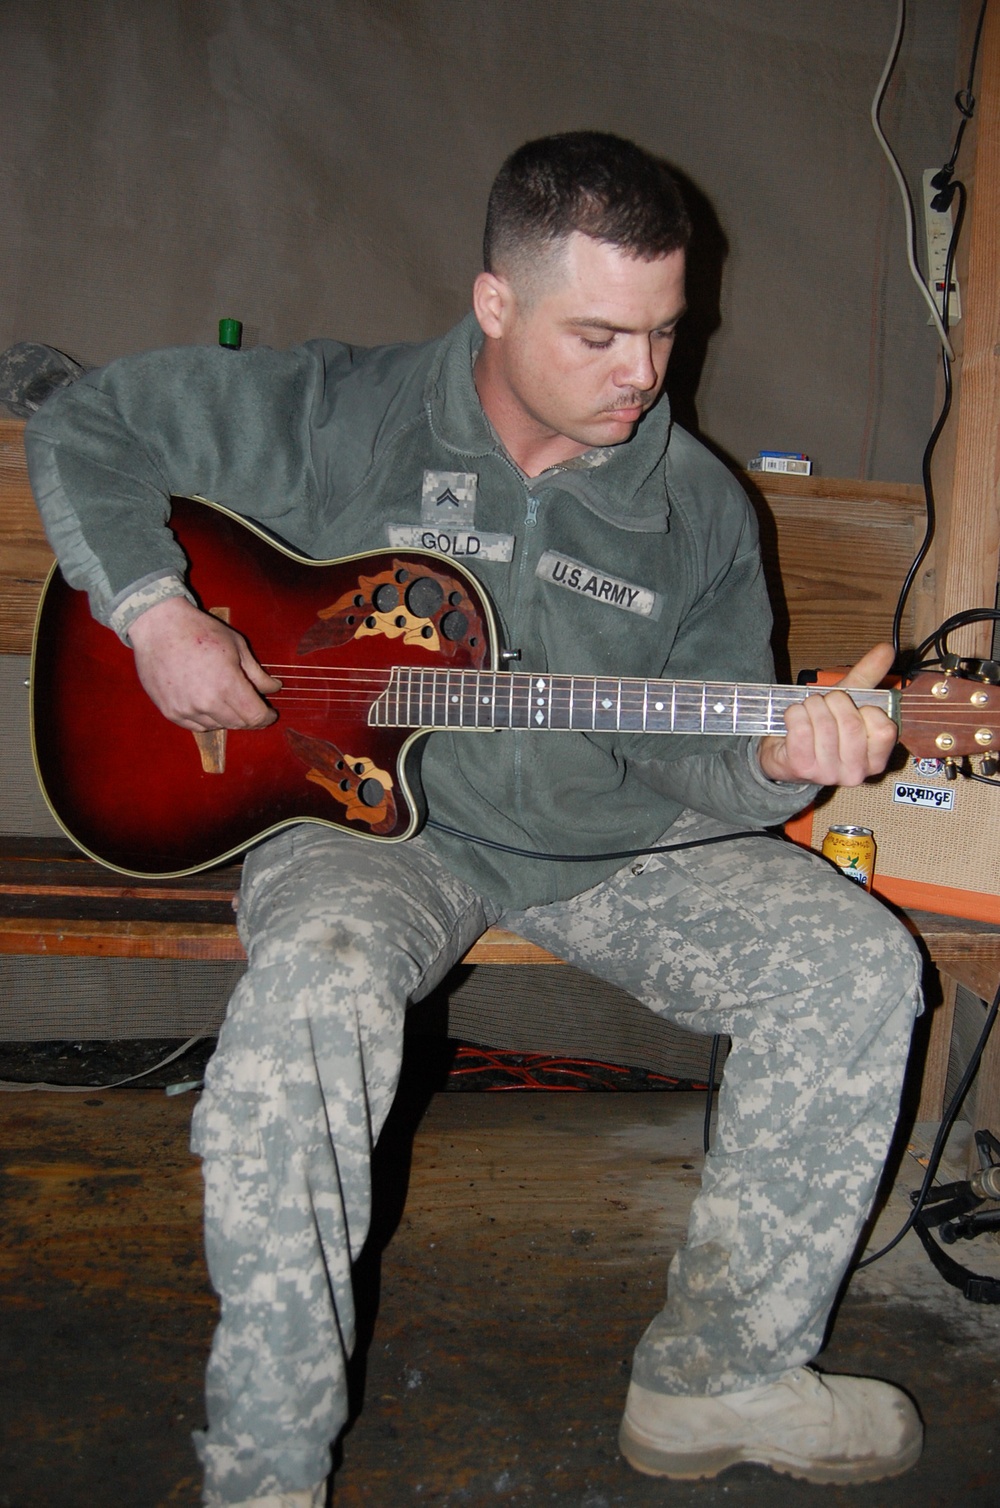 Finger-pickin’ good: Soldier strums guitar, writes songs from his heart